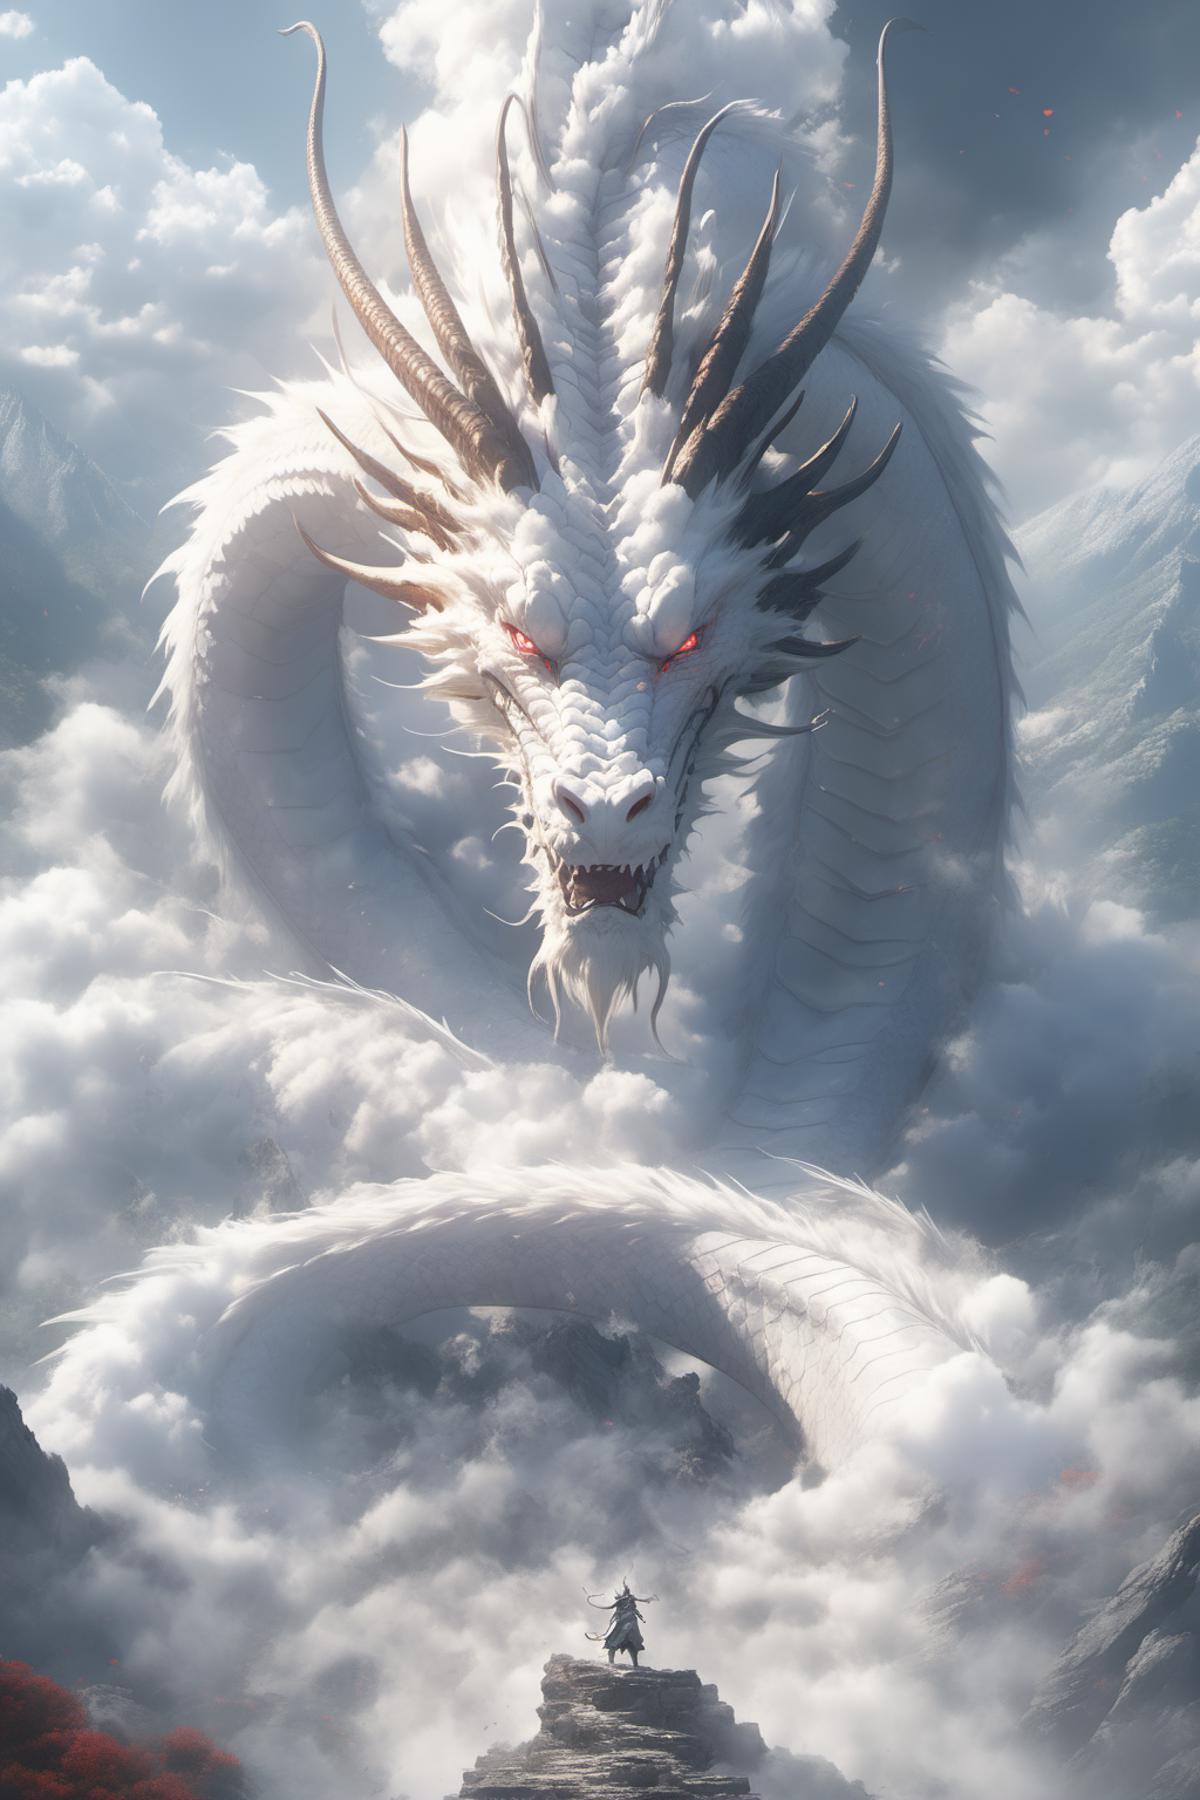 The image features a large, white dragon with red eyes, sitting on top of a mountain. The dragon appears to be angry, as it has its mouth open and is surrounded by clouds. The scene is quite dramatic and captivating, showcasing the dragon's powerful presence in the landscape.